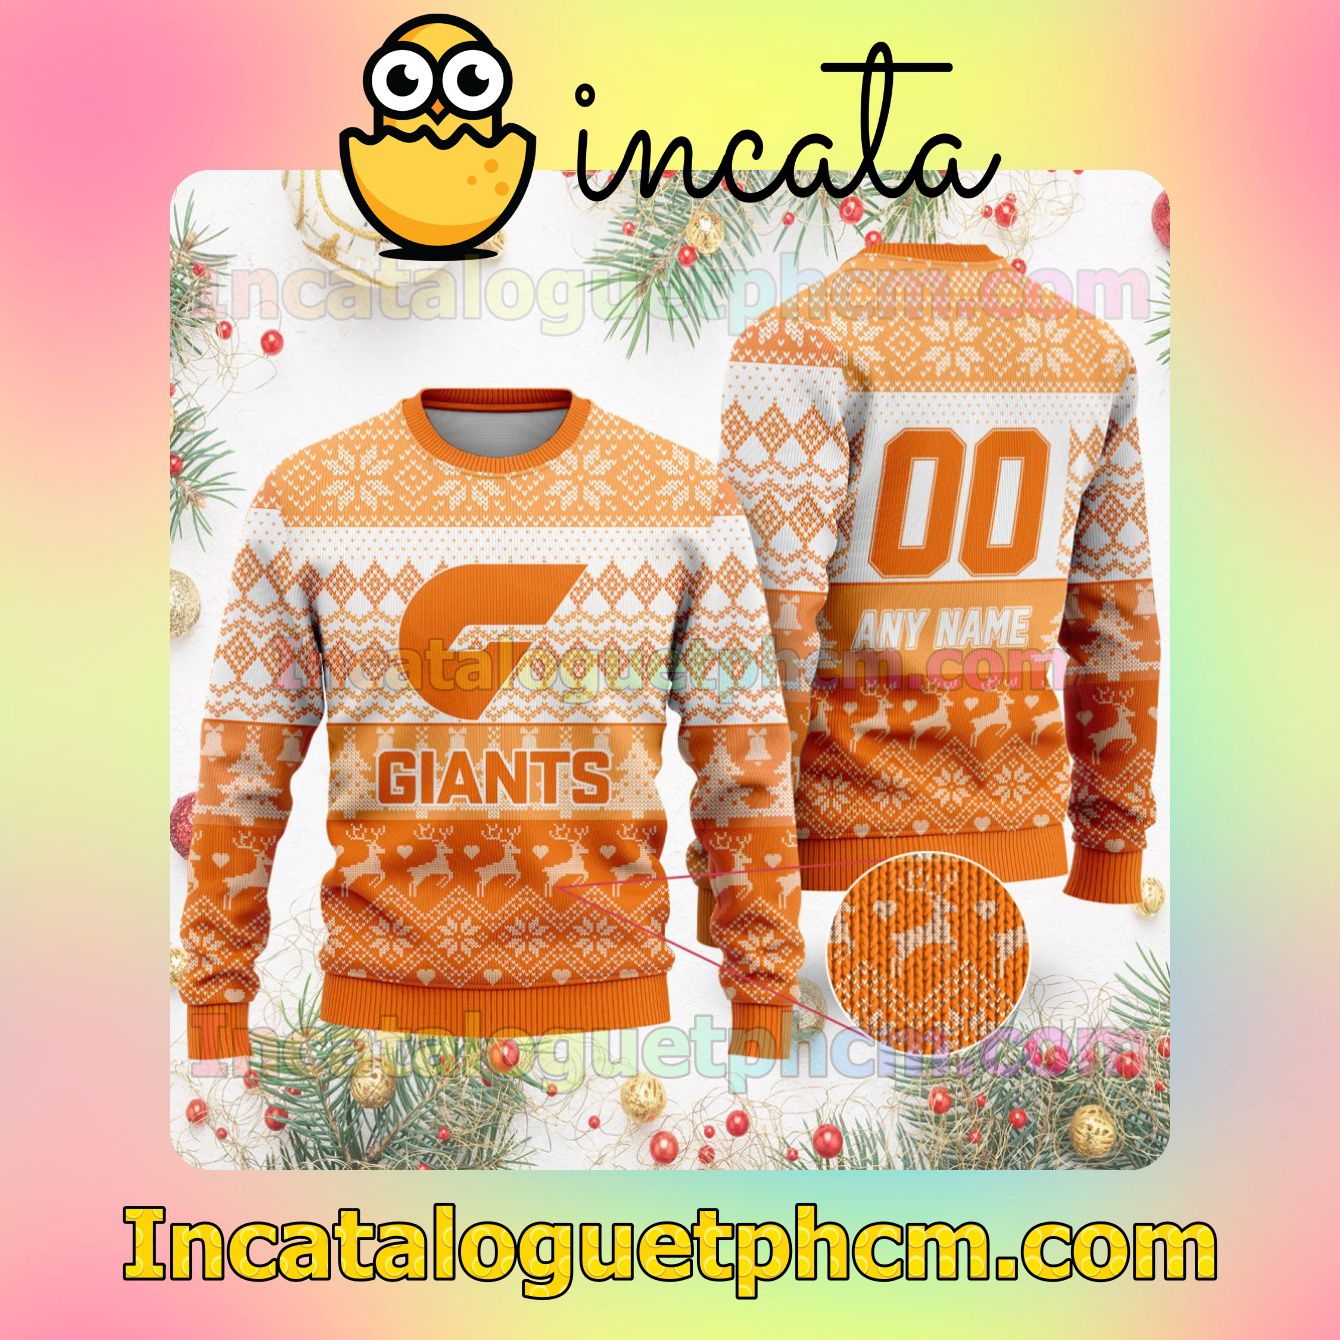 Top AFL Greater Western Sydney Giants Ugly Christmas Jumper Sweater